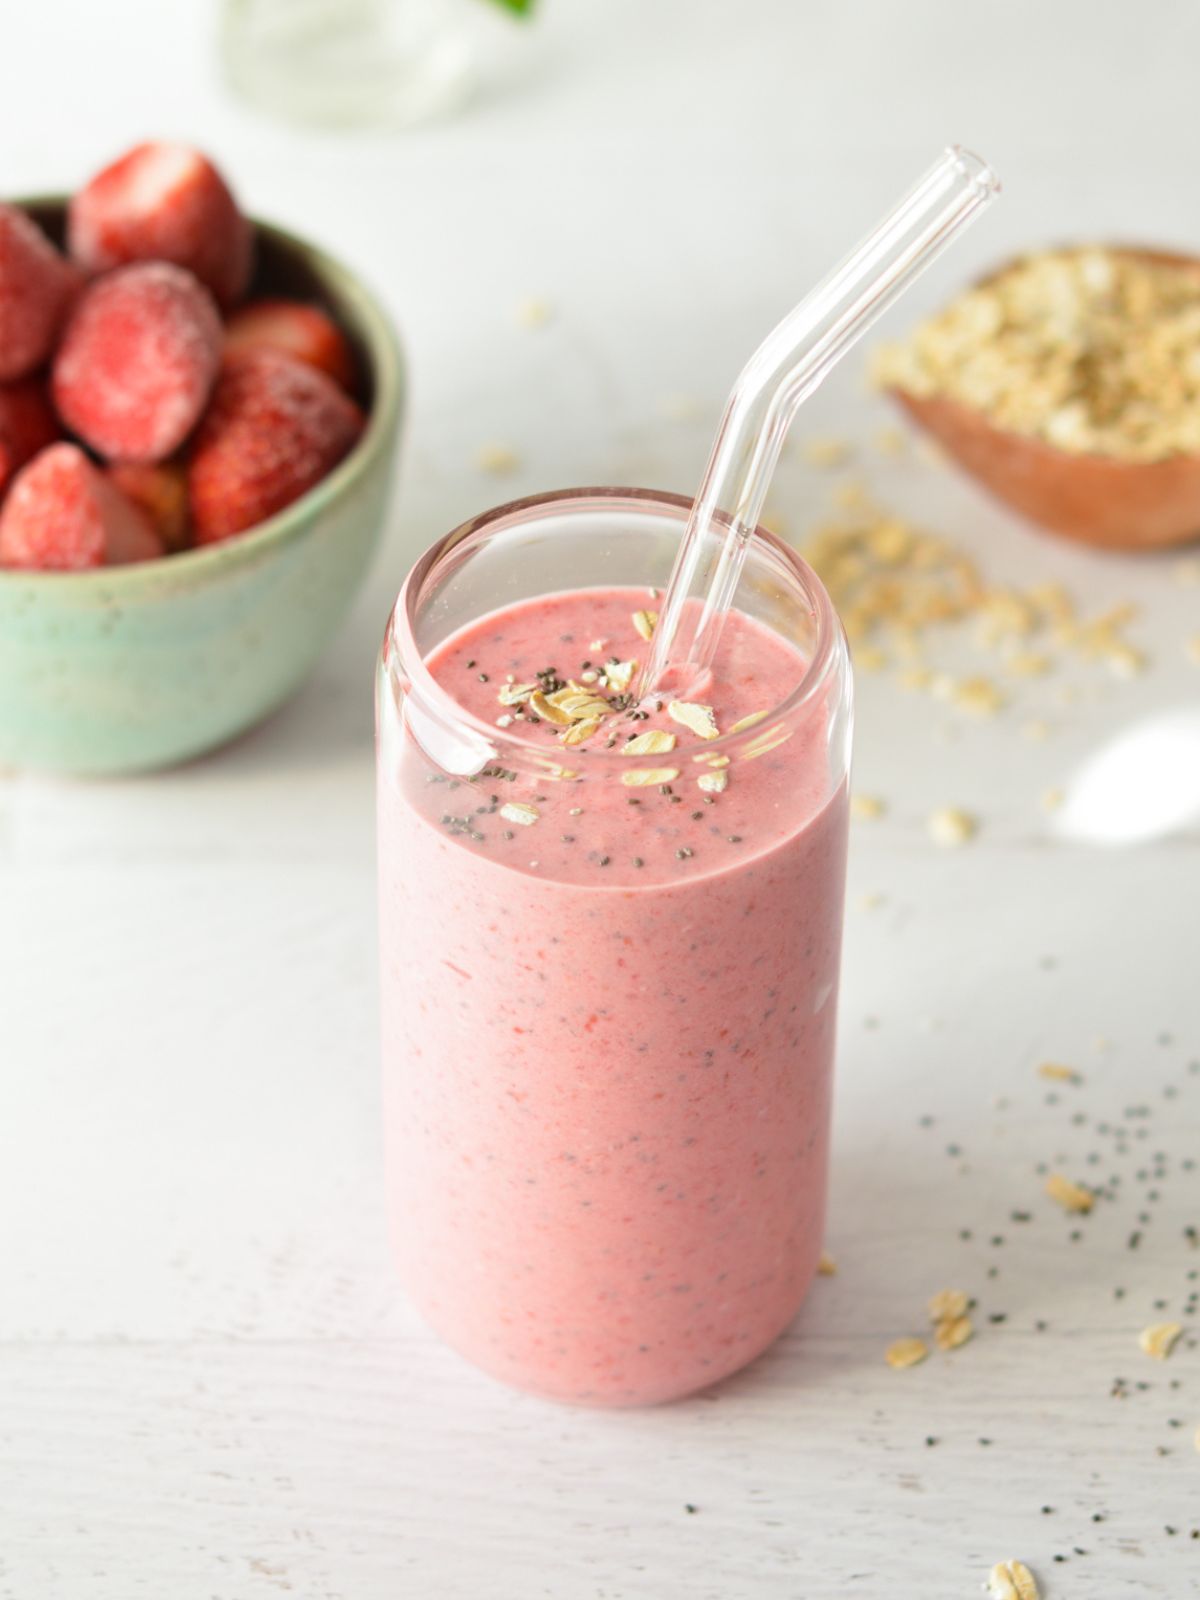 raspberry smoothie with oats and chia seeds on top.